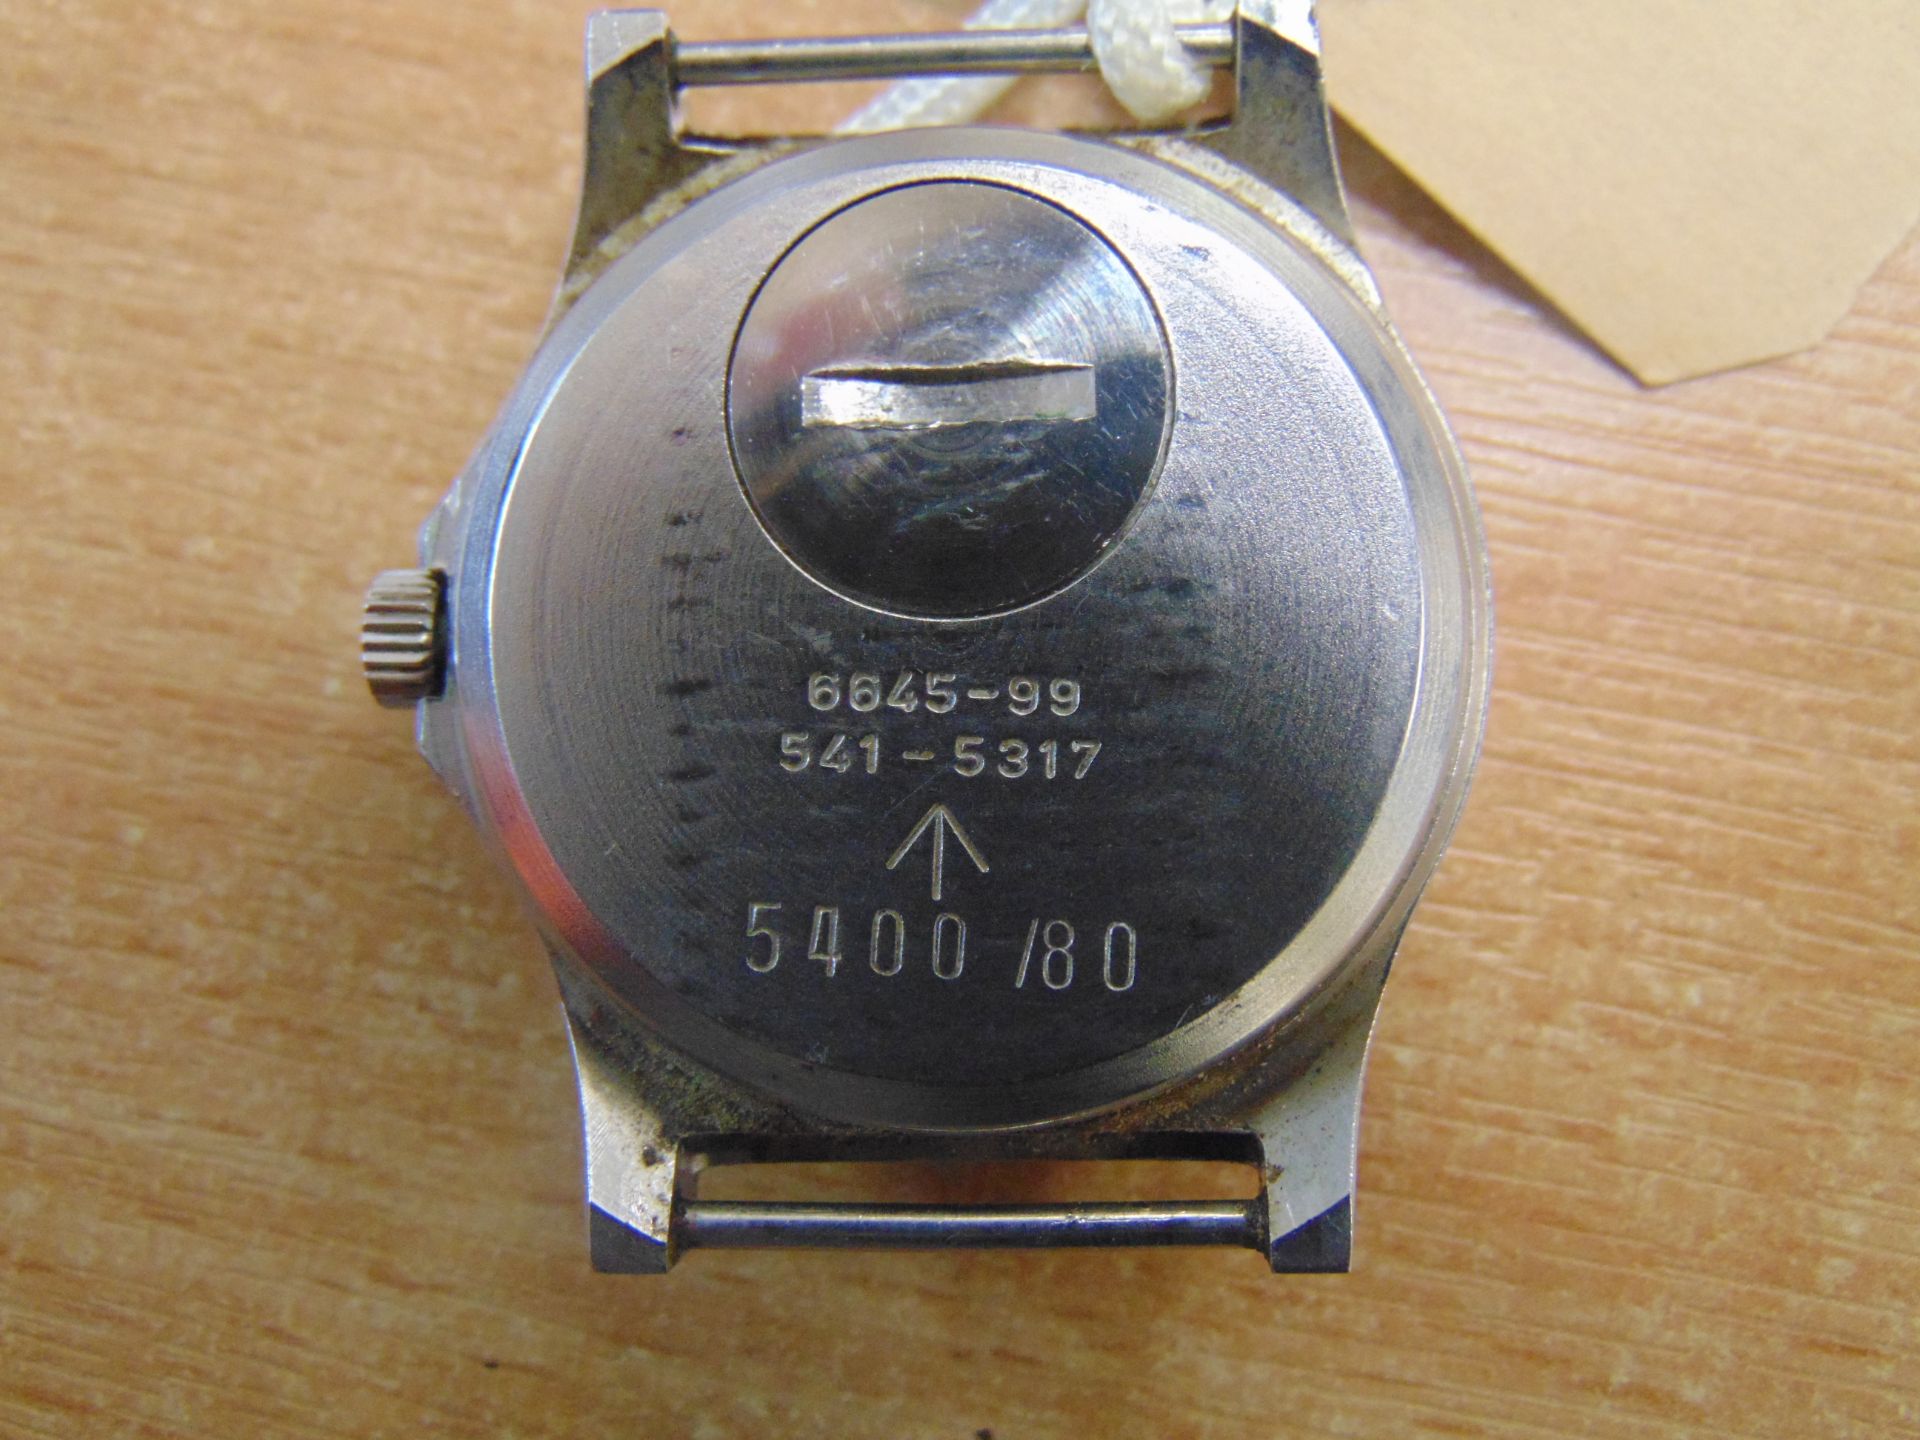 V.RARE CWC FAT BOY SERVICE WATCH NATO MARKS DATE1980 *PRE FALKLANDS WAR*SMALL CRACK IN GLASS SN.5400 - Image 3 of 5